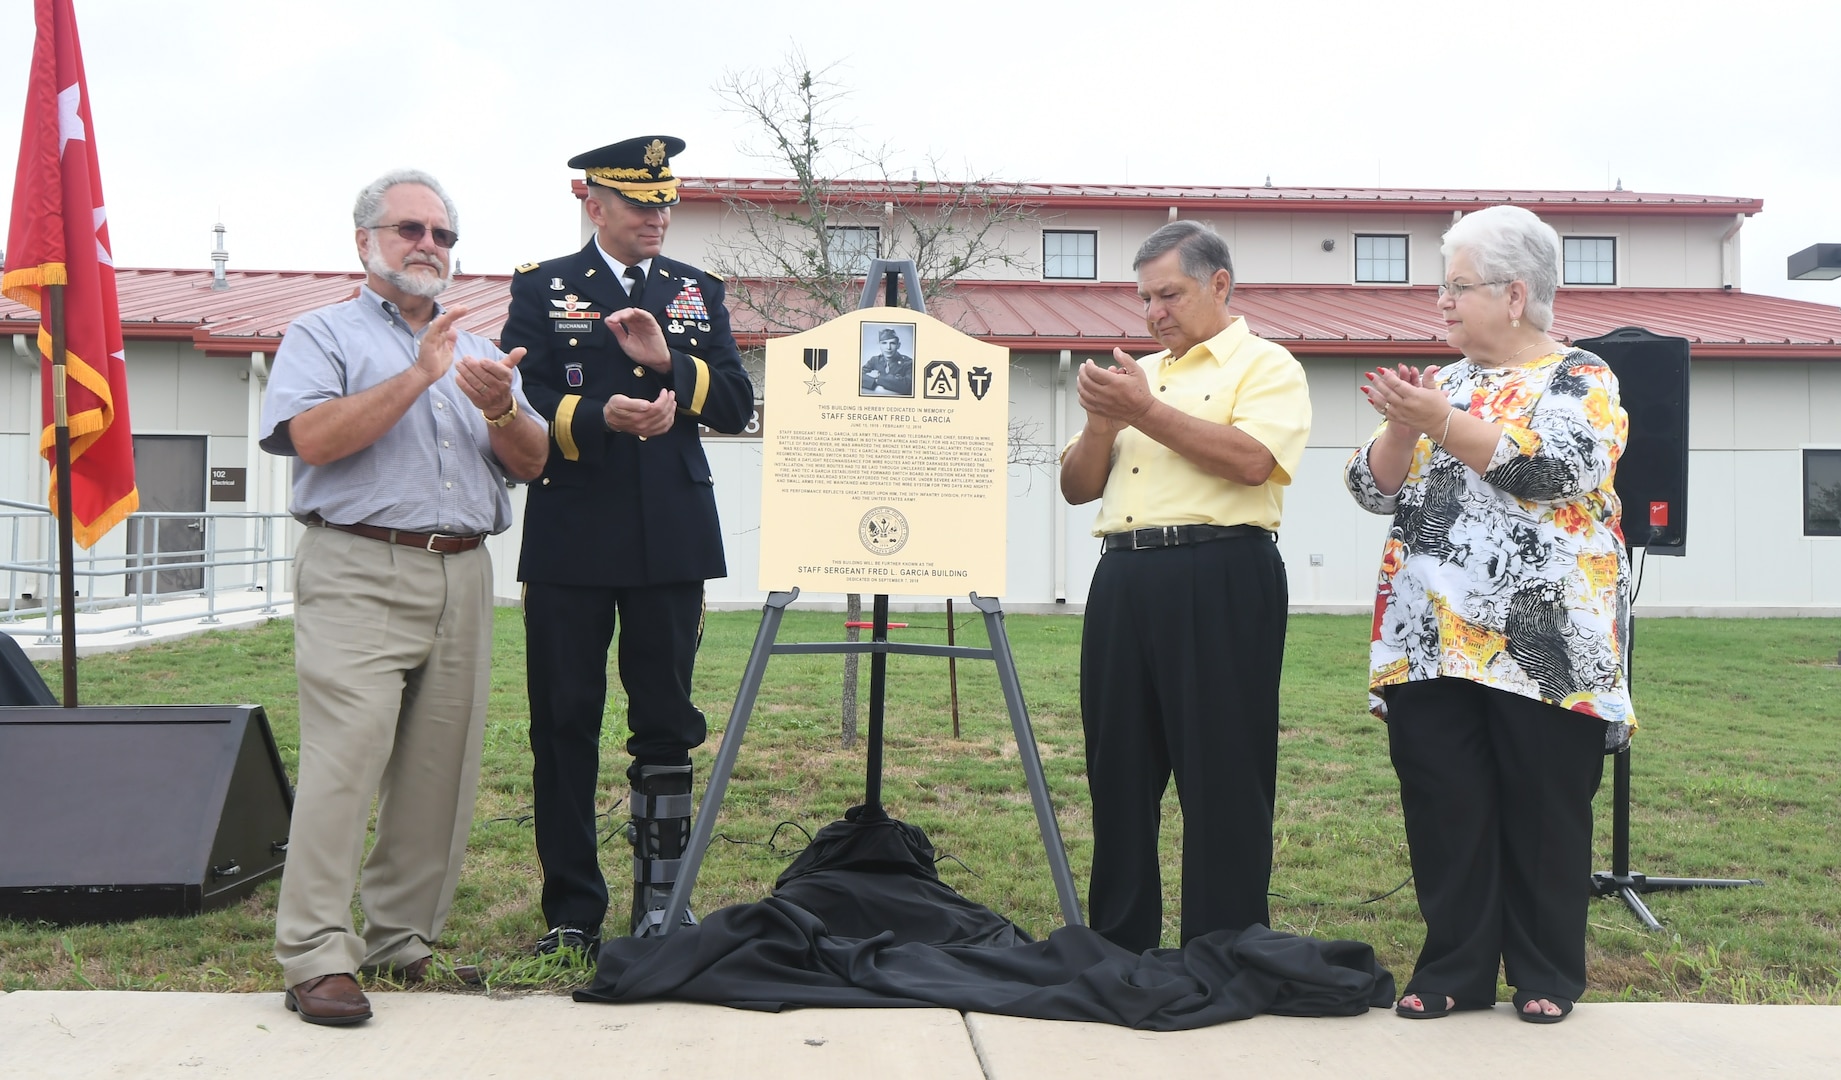 Staff Sgt. Fred Garcia, a U.S. Army telephone and telegraph line chief who fought in World War II and was awarded the Bronze Star for his actions during the Battle of Rapido River in Italy, was honored during a building memorialization ceremony at Joint Base San Antonio-Fort Sam Houston Sept. 7. Garcia was a San Antonio native and a direct descendent of the Padron family, one of the original 16 families who founded the city. Lt. Gen. Jeffrey Buchanan (center, left), commanding general, U.S. Army North, joins (from right) Kenneth Garcia, Wayne Garcia and Diana Garcia-Schulze, all children of the late Staff Sgt. Fred Garcia, in the unveiling of the commemorative plaque to be mounted at the entrance of the U.S. Army North (5th Army)  communications building, the Staff Sgt. Fred L. Garcia building.